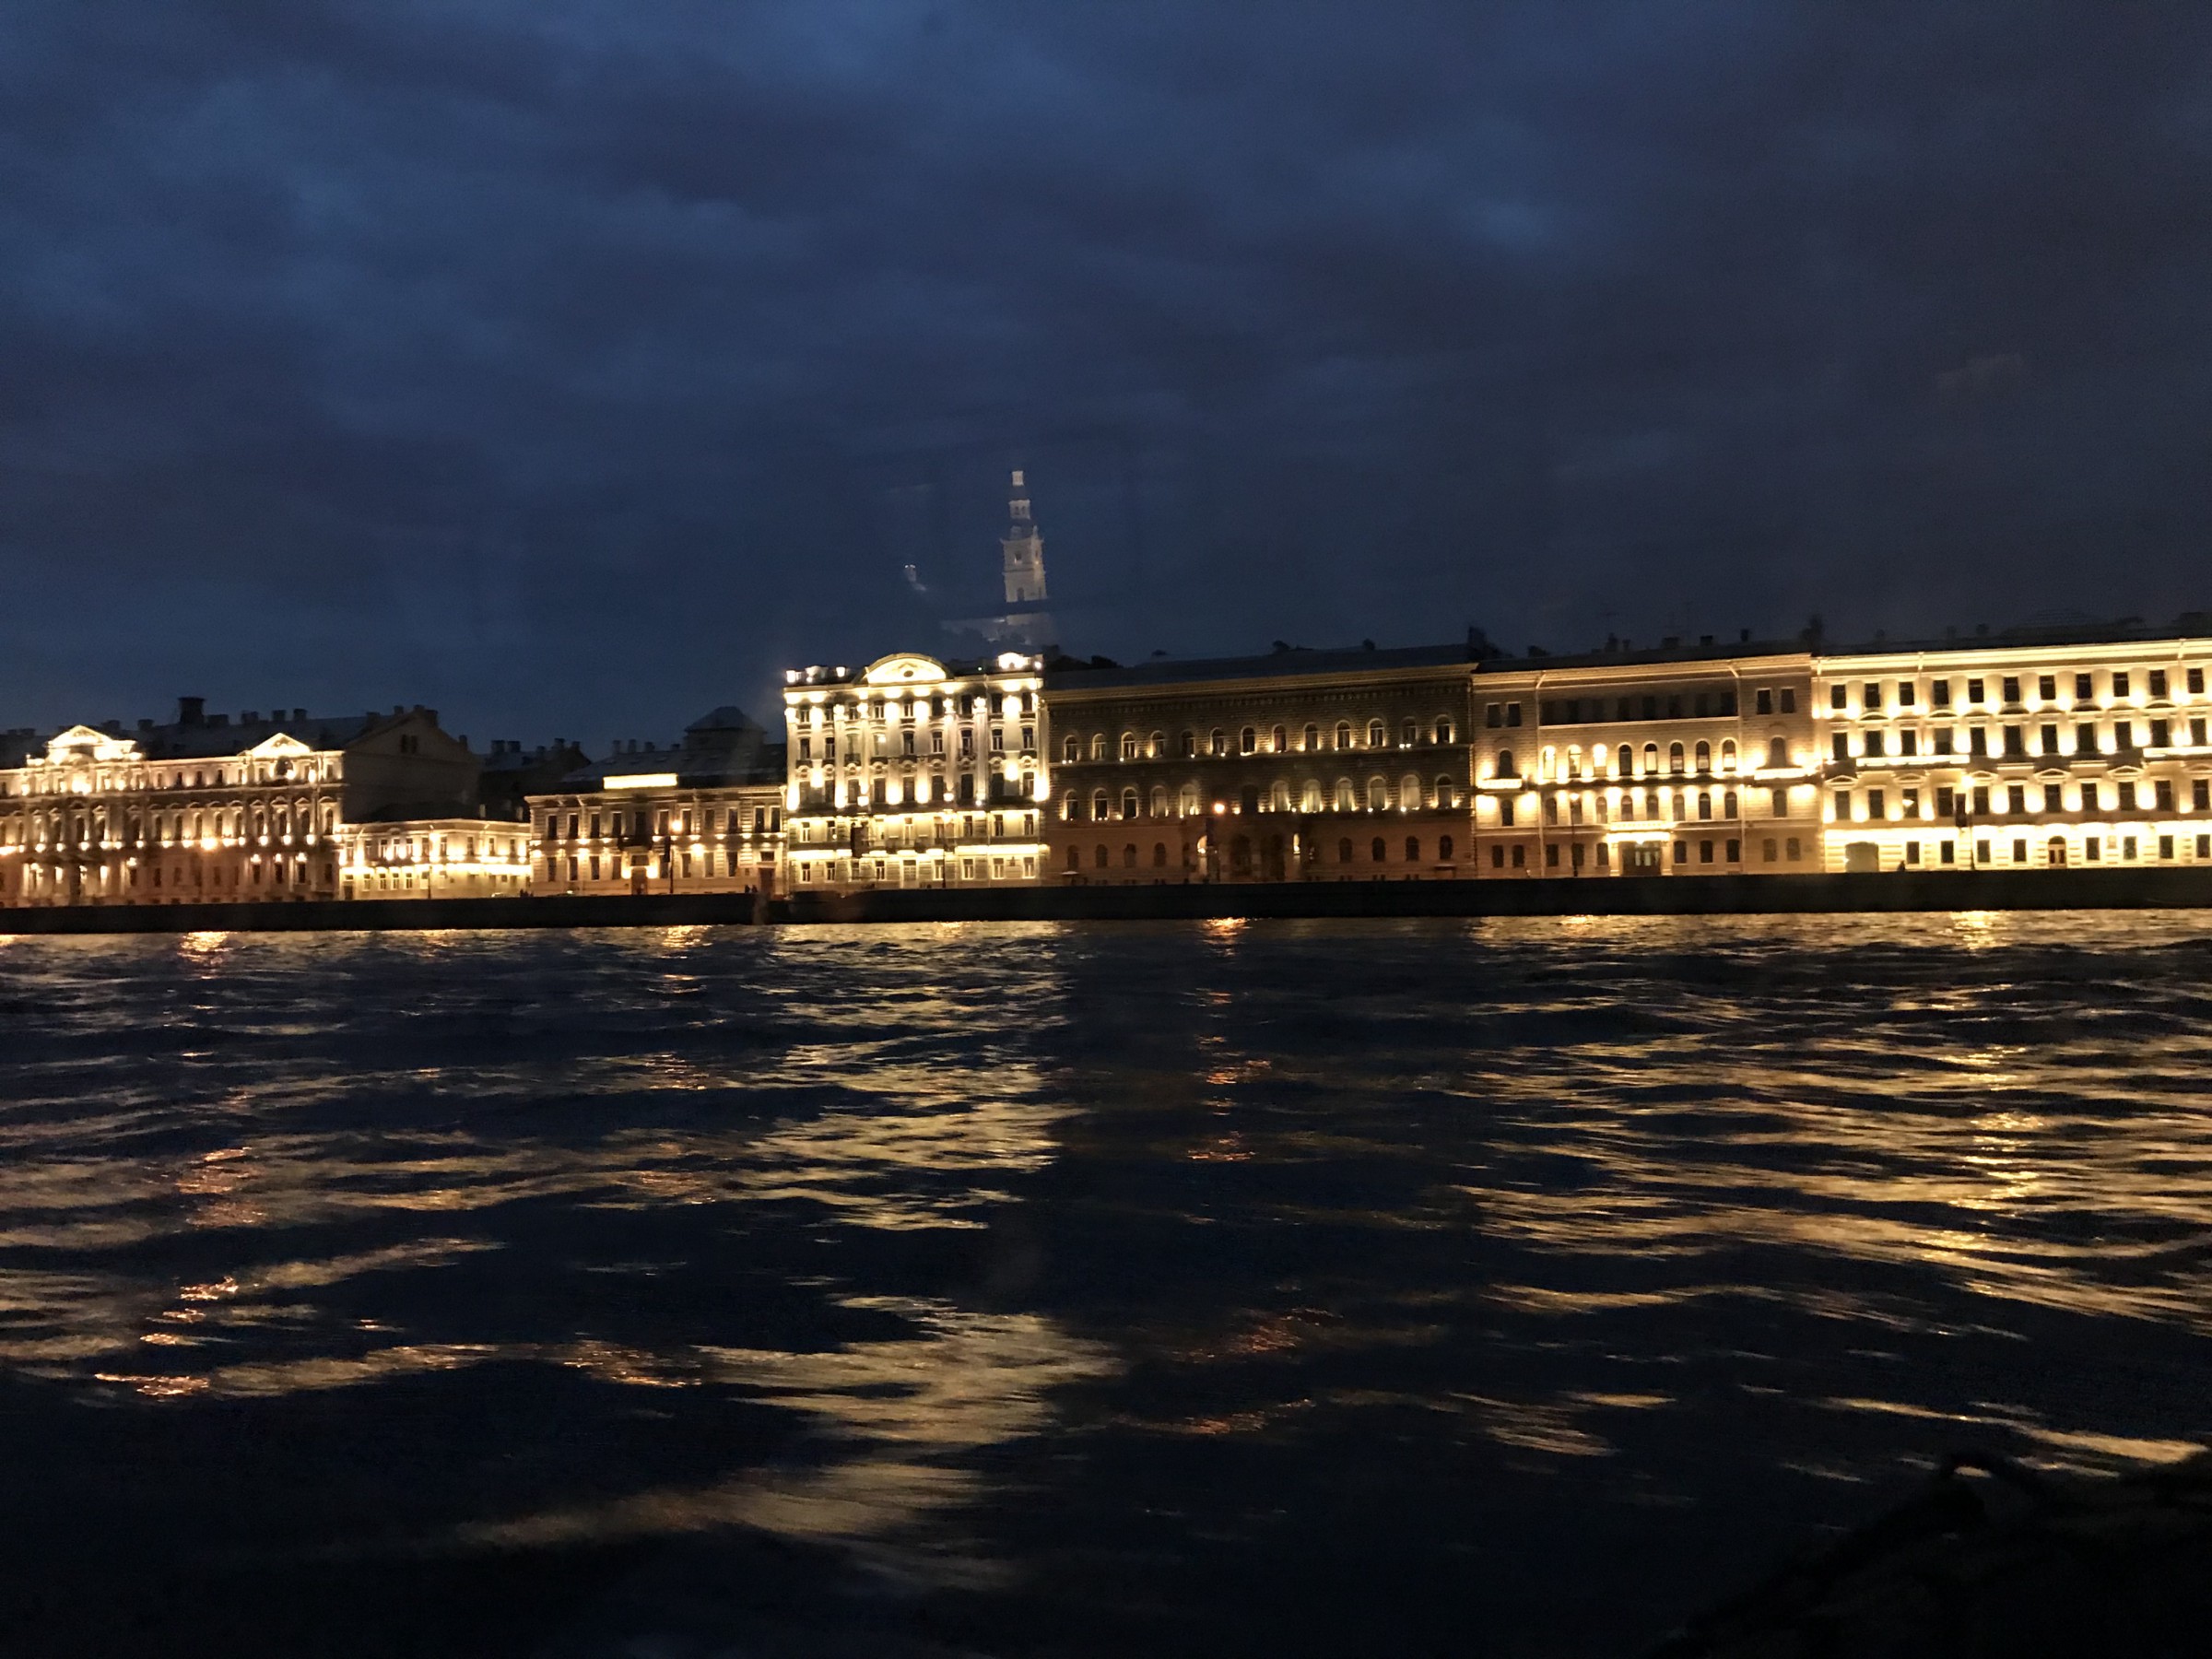 St Petersburg at night, seen from the Neva river.